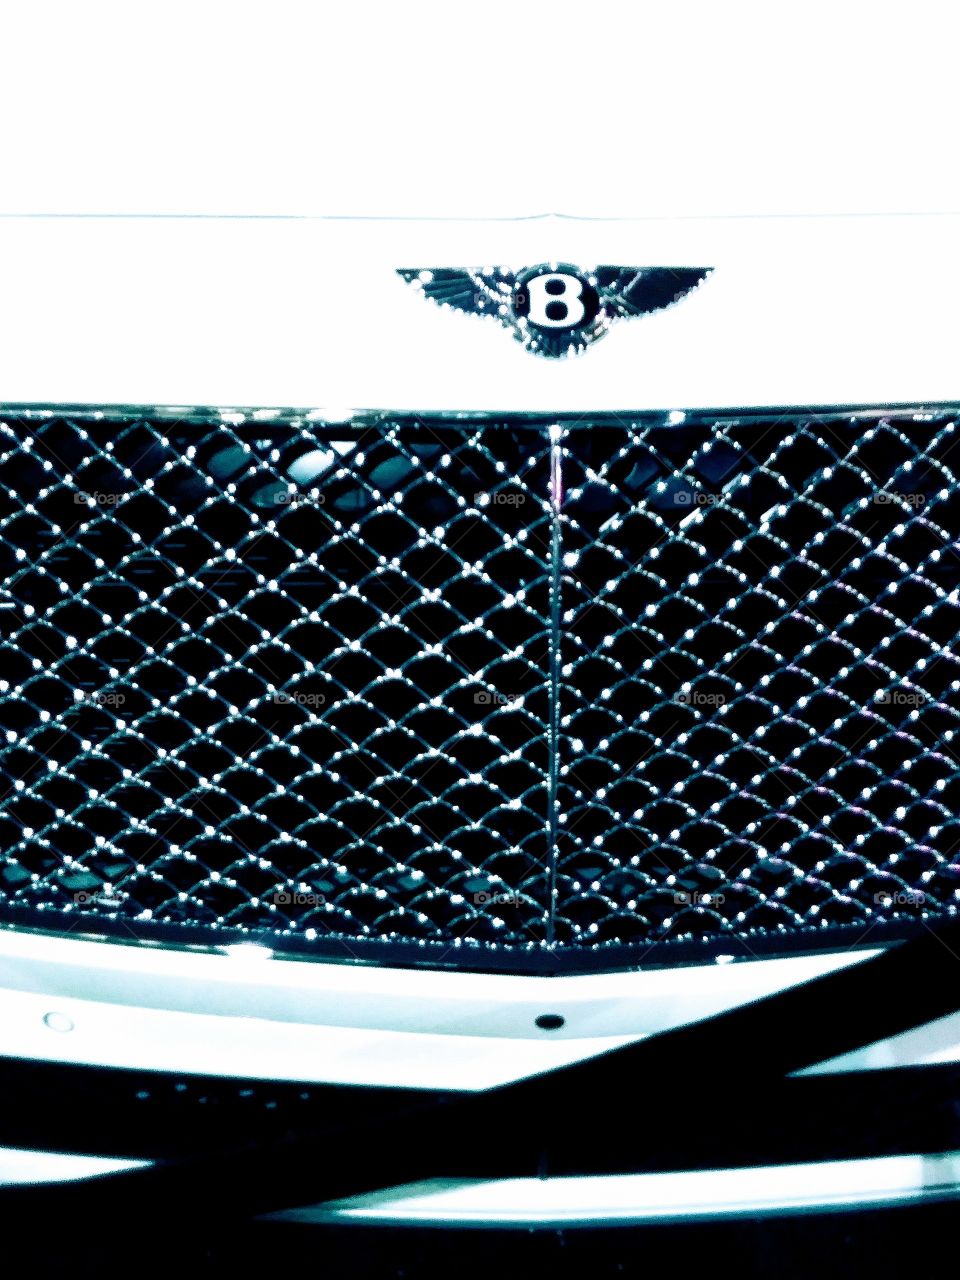 Bently Grill